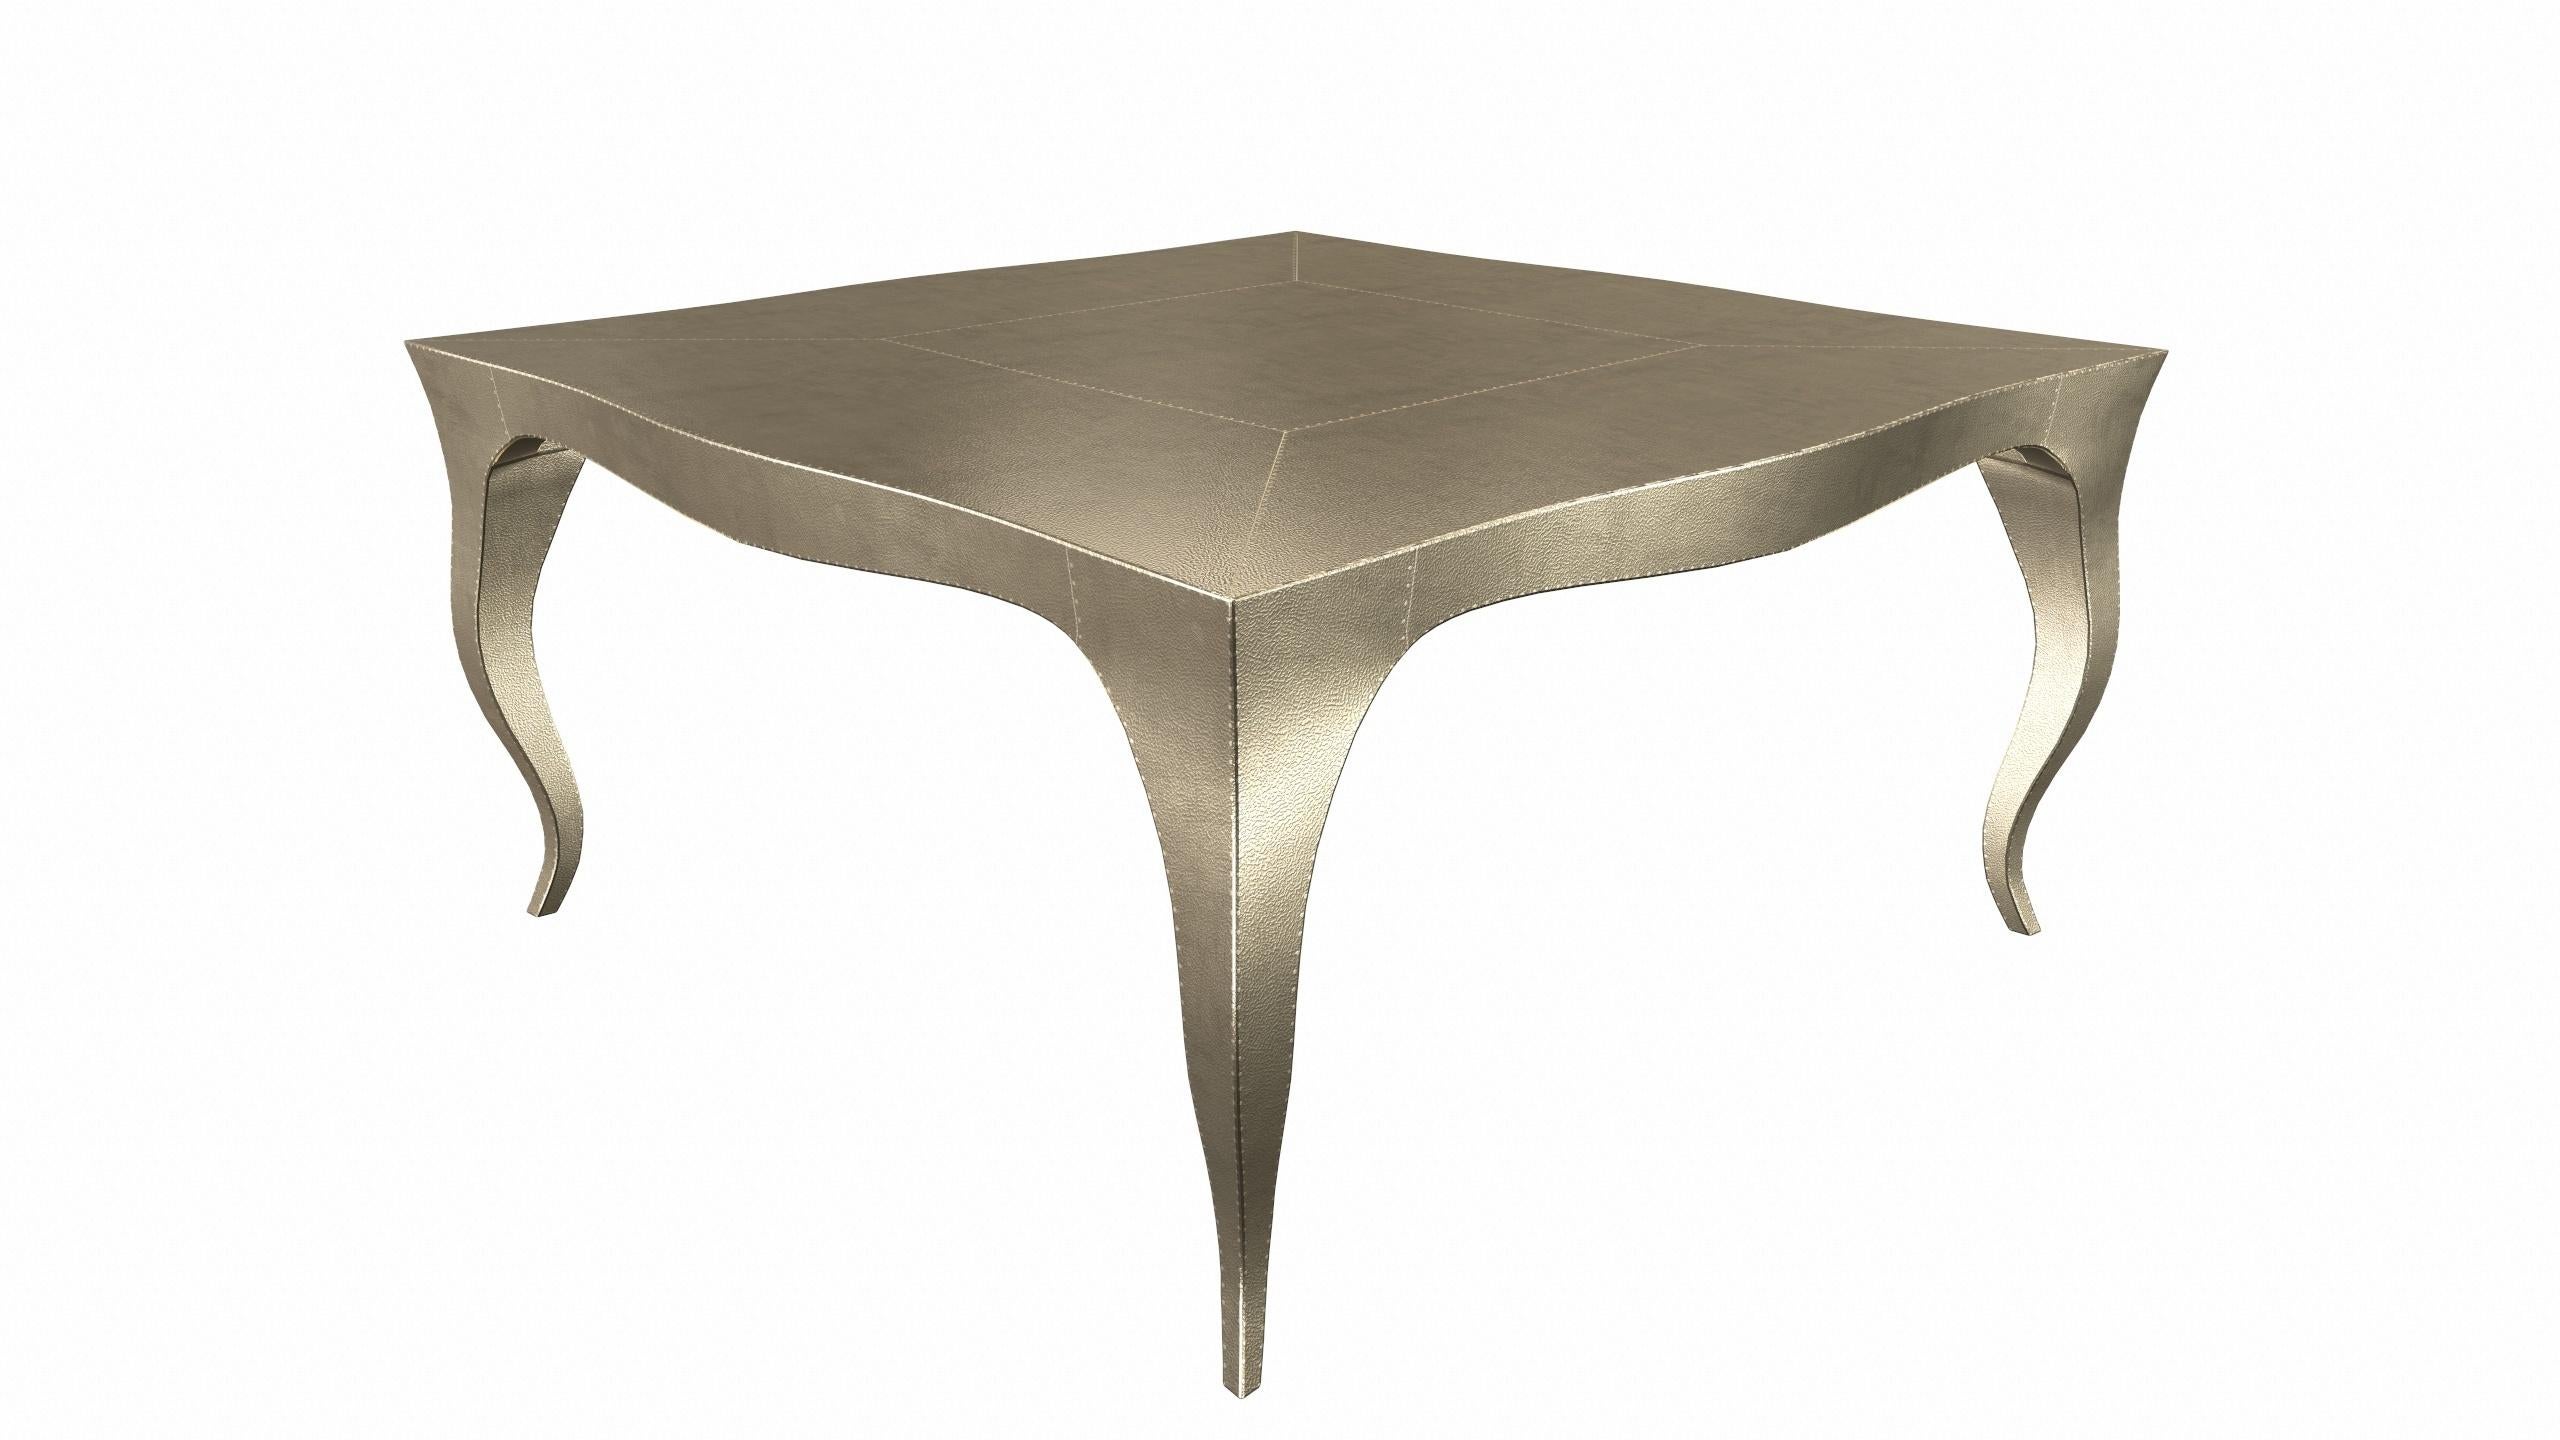 Other Louise Art Deco Nesting Tables Fine Hammered Brass 18.5x18.5x10 inch by Paul M For Sale